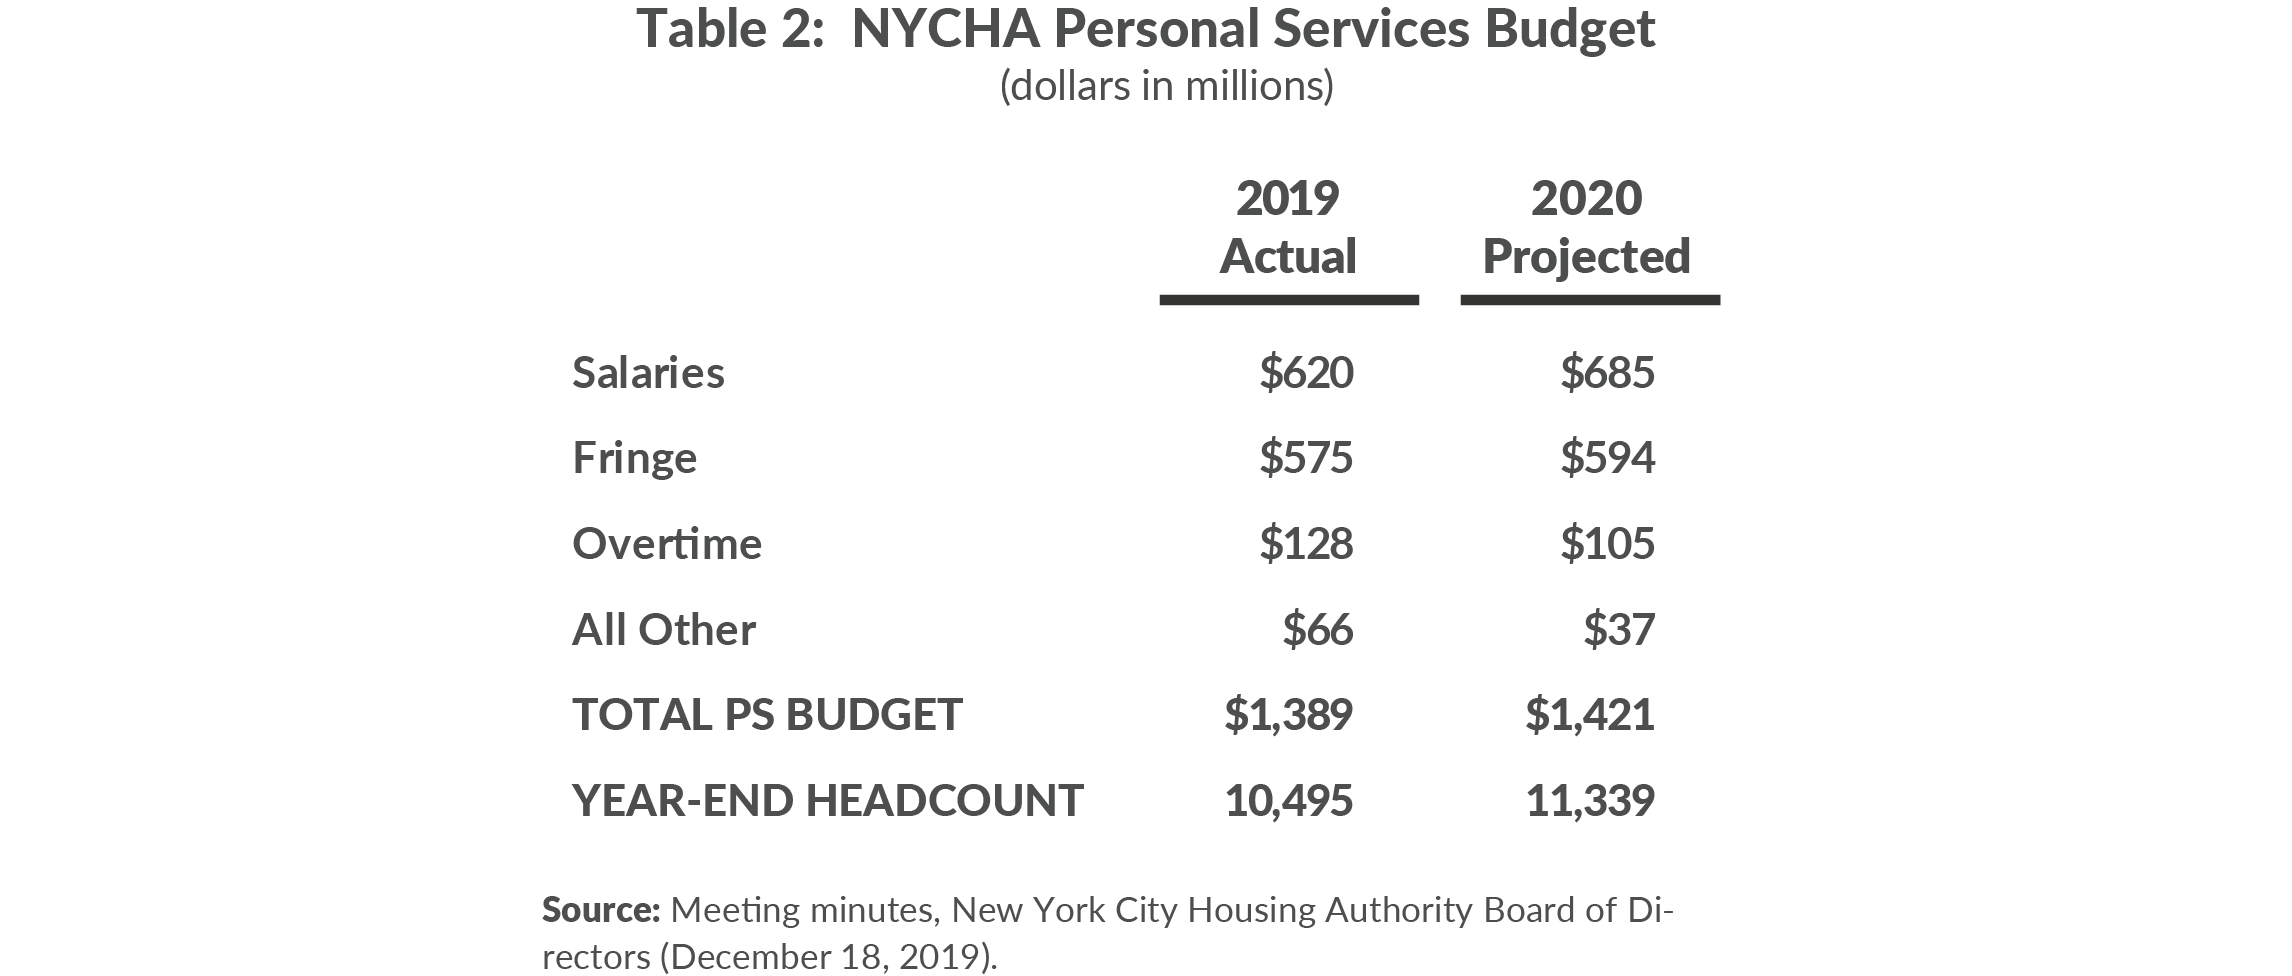 Table 2. NYCHA Personal Services Budget (dollars in millions)